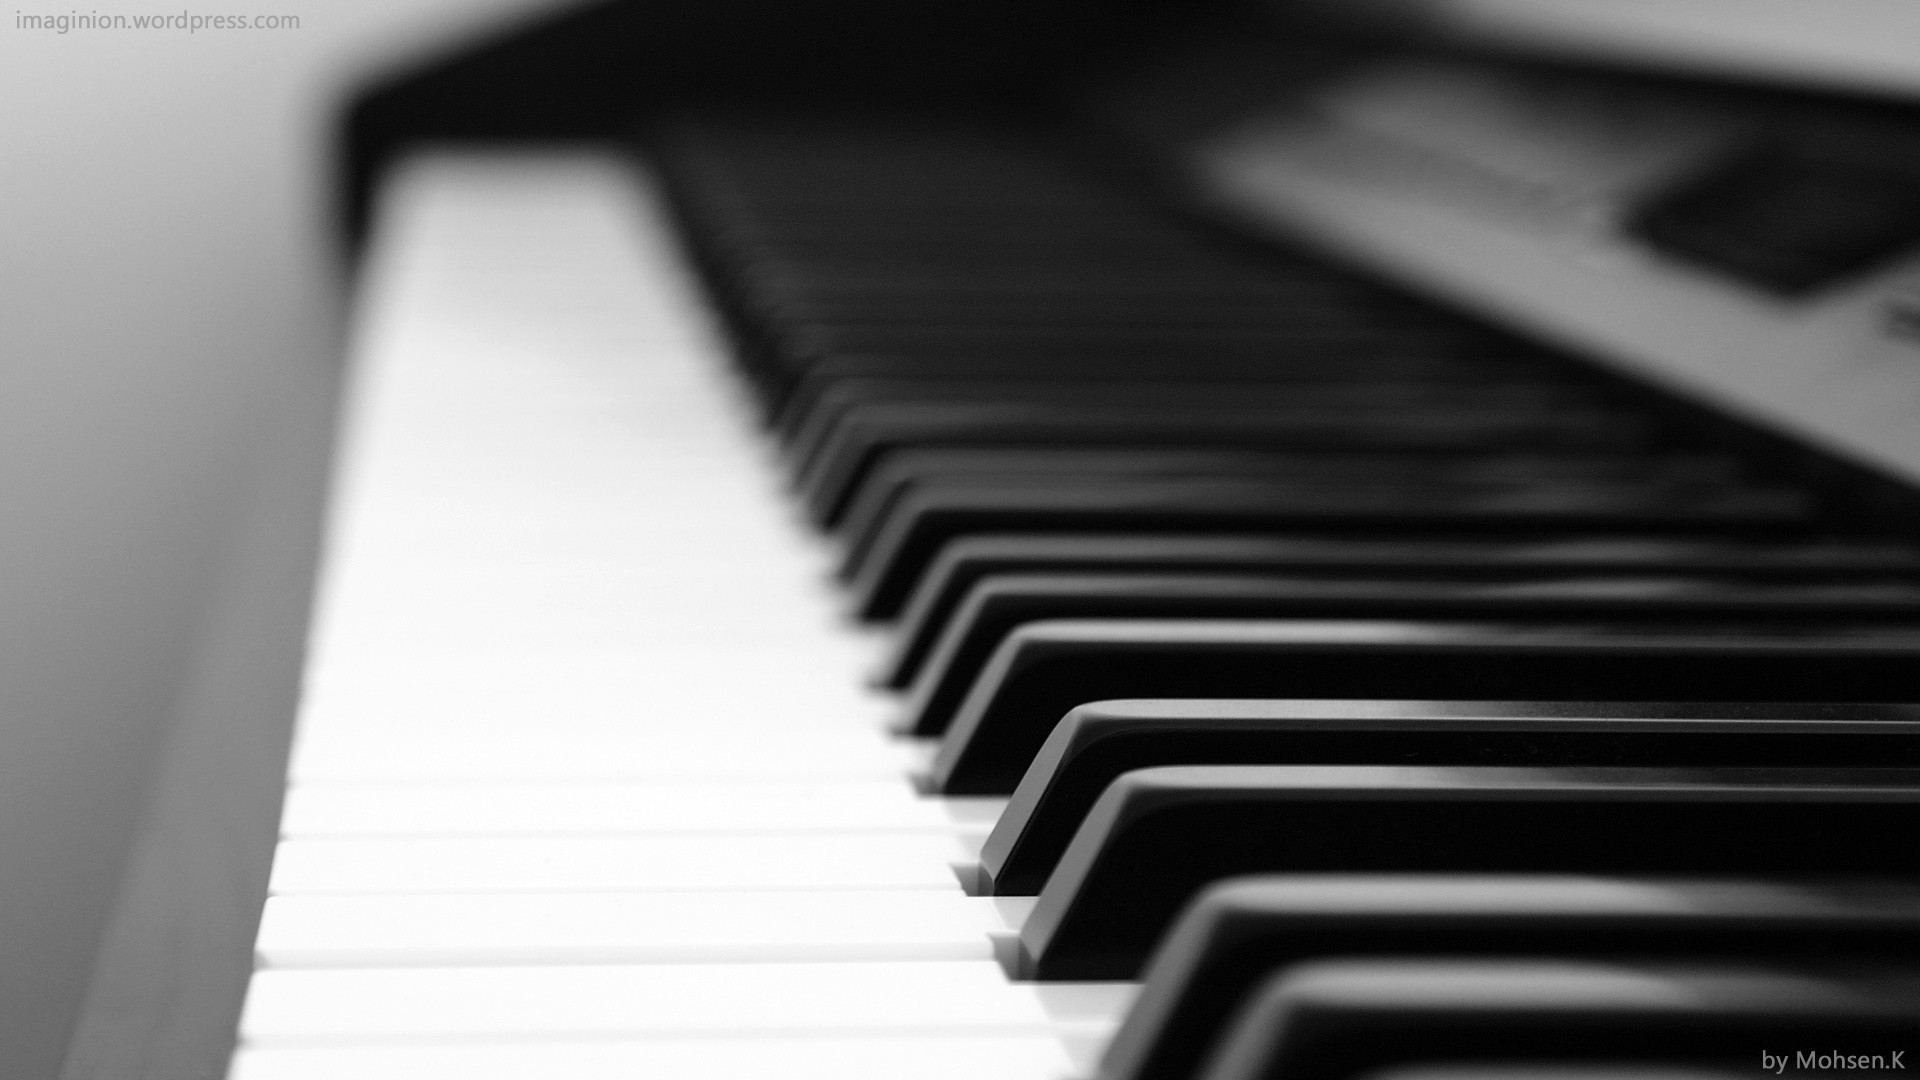 1920x1080 Piano Pictures, wallpaper, Black and White Piano Pictures hd wallpaper .